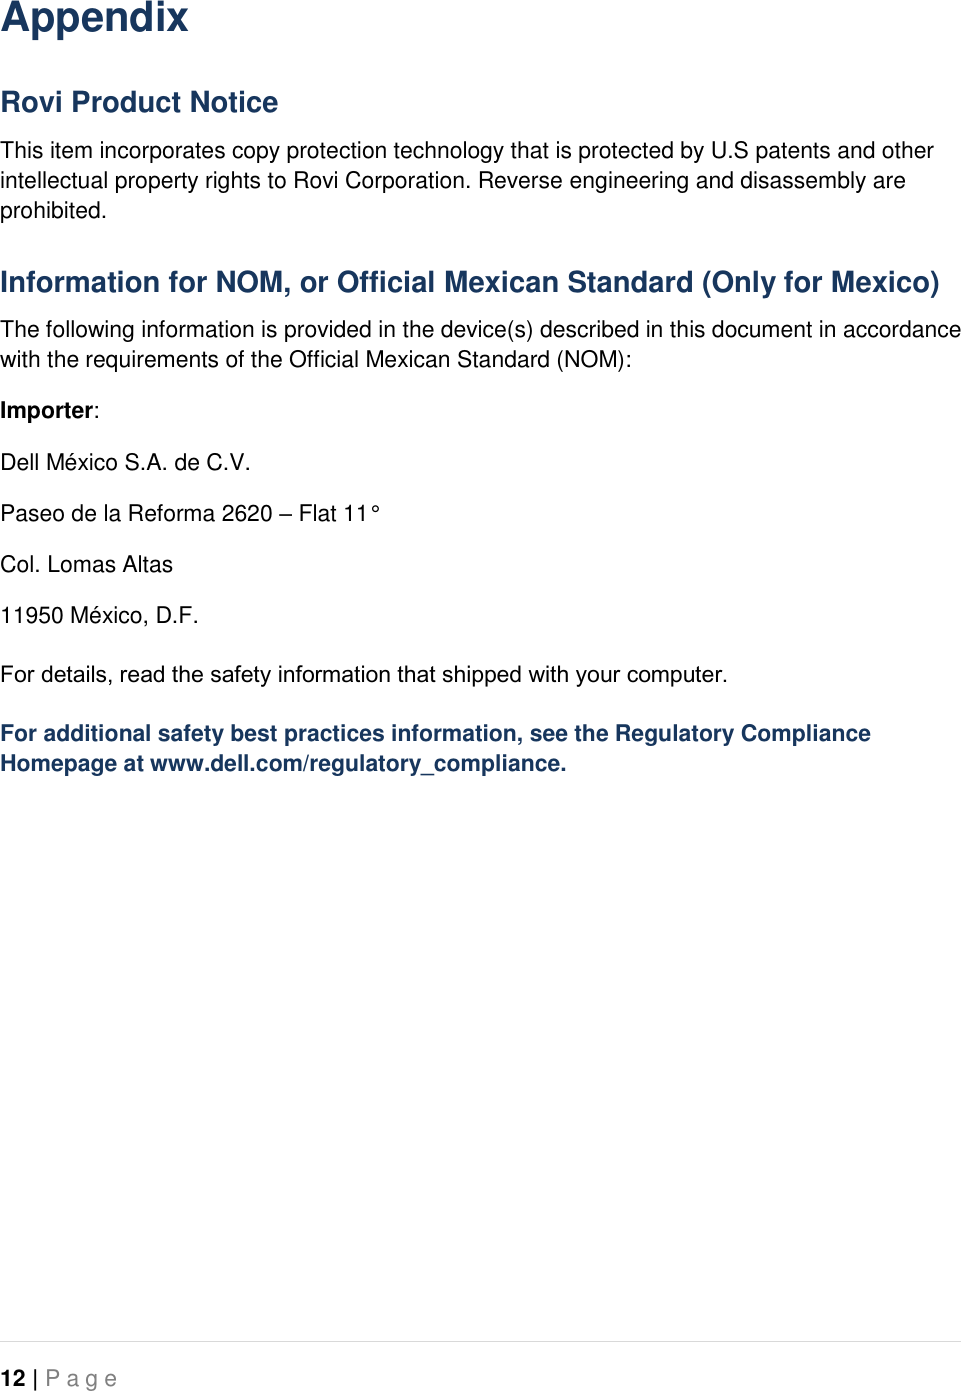   12 | P a g e   Appendix Rovi Product Notice This item incorporates copy protection technology that is protected by U.S patents and other intellectual property rights to Rovi Corporation. Reverse engineering and disassembly are prohibited. Information for NOM, or Official Mexican Standard (Only for Mexico) The following information is provided in the device(s) described in this document in accordance with the requirements of the Official Mexican Standard (NOM): Importer: Dell México S.A. de C.V. Paseo de la Reforma 2620 – Flat 11° Col. Lomas Altas 11950 México, D.F. For details, read the safety information that shipped with your computer. For additional safety best practices information, see the Regulatory Compliance Homepage at www.dell.com/regulatory_compliance.  